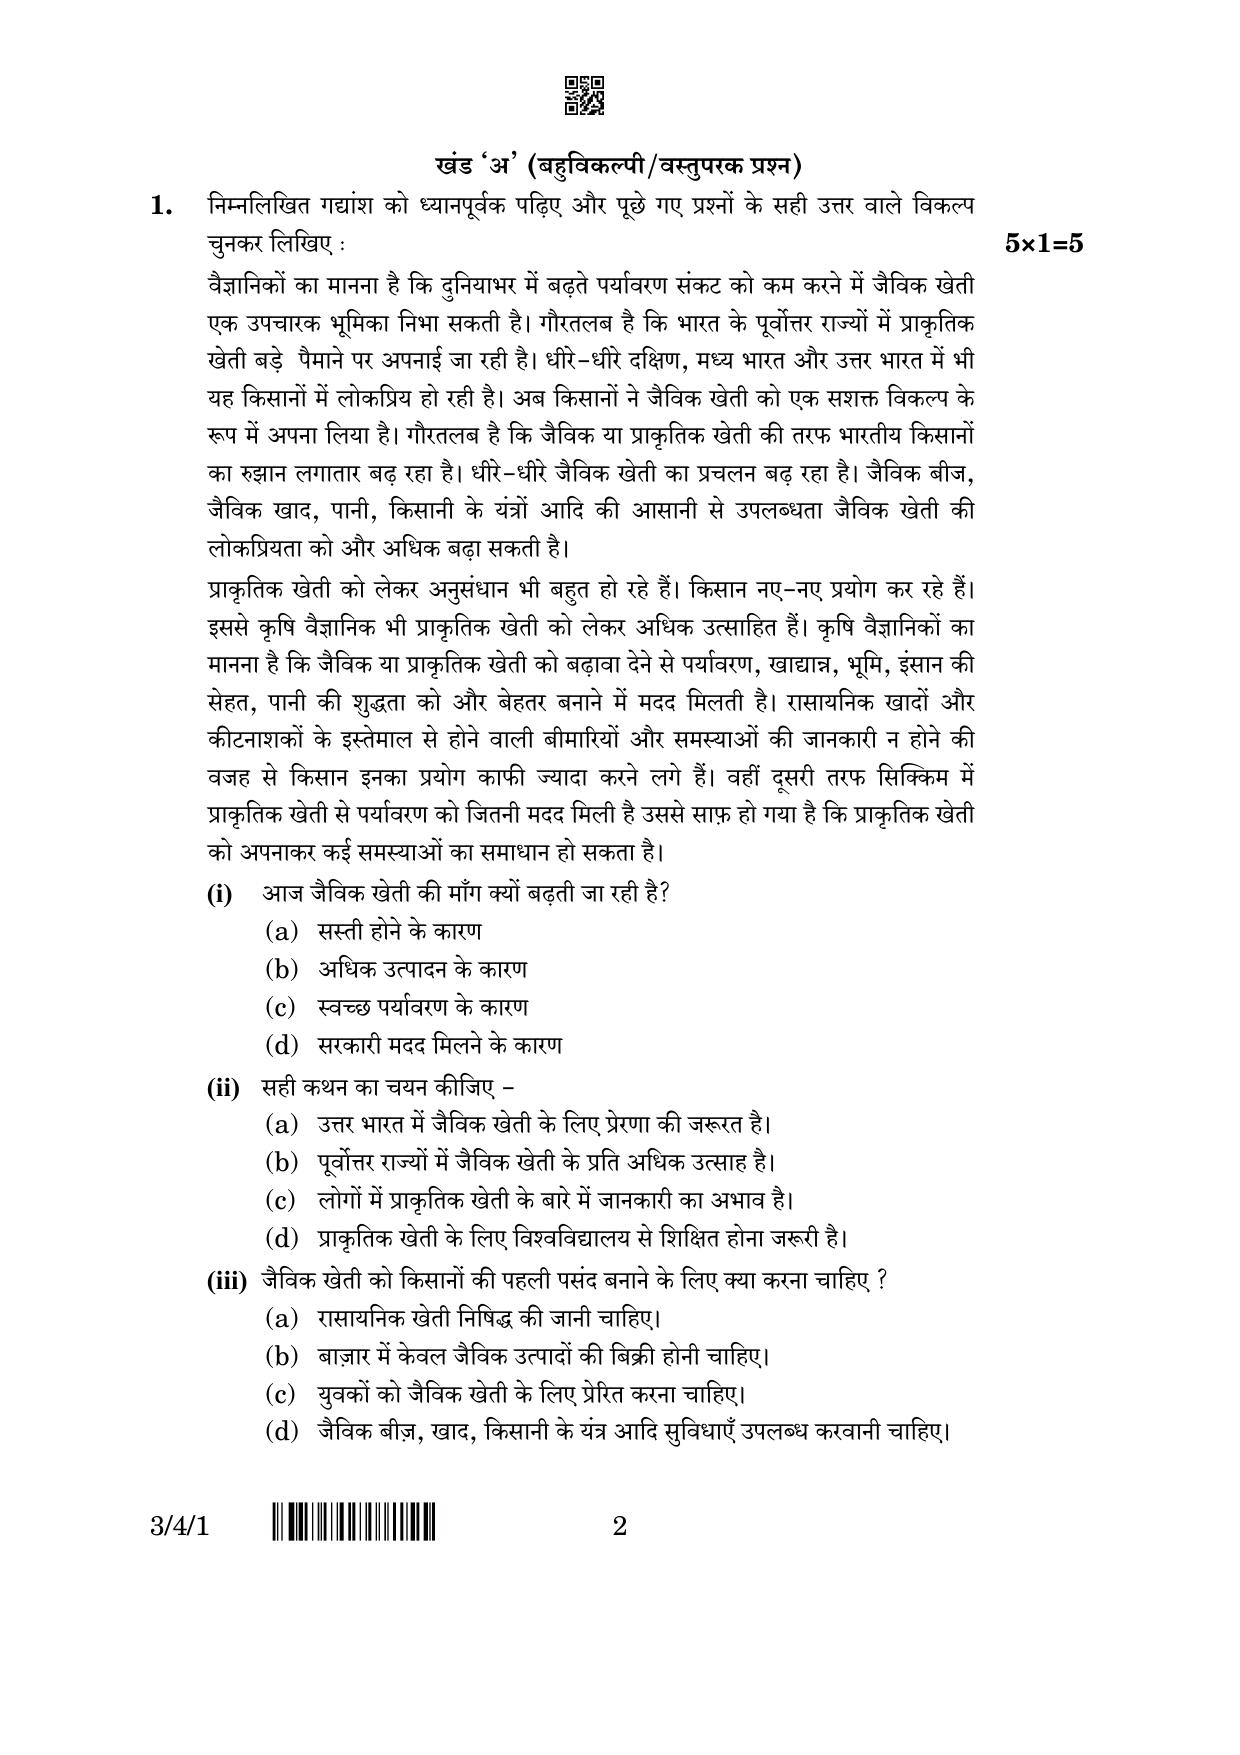 CBSE Class 10 3-4-1 Hindi A 2023 Question Paper - Page 2